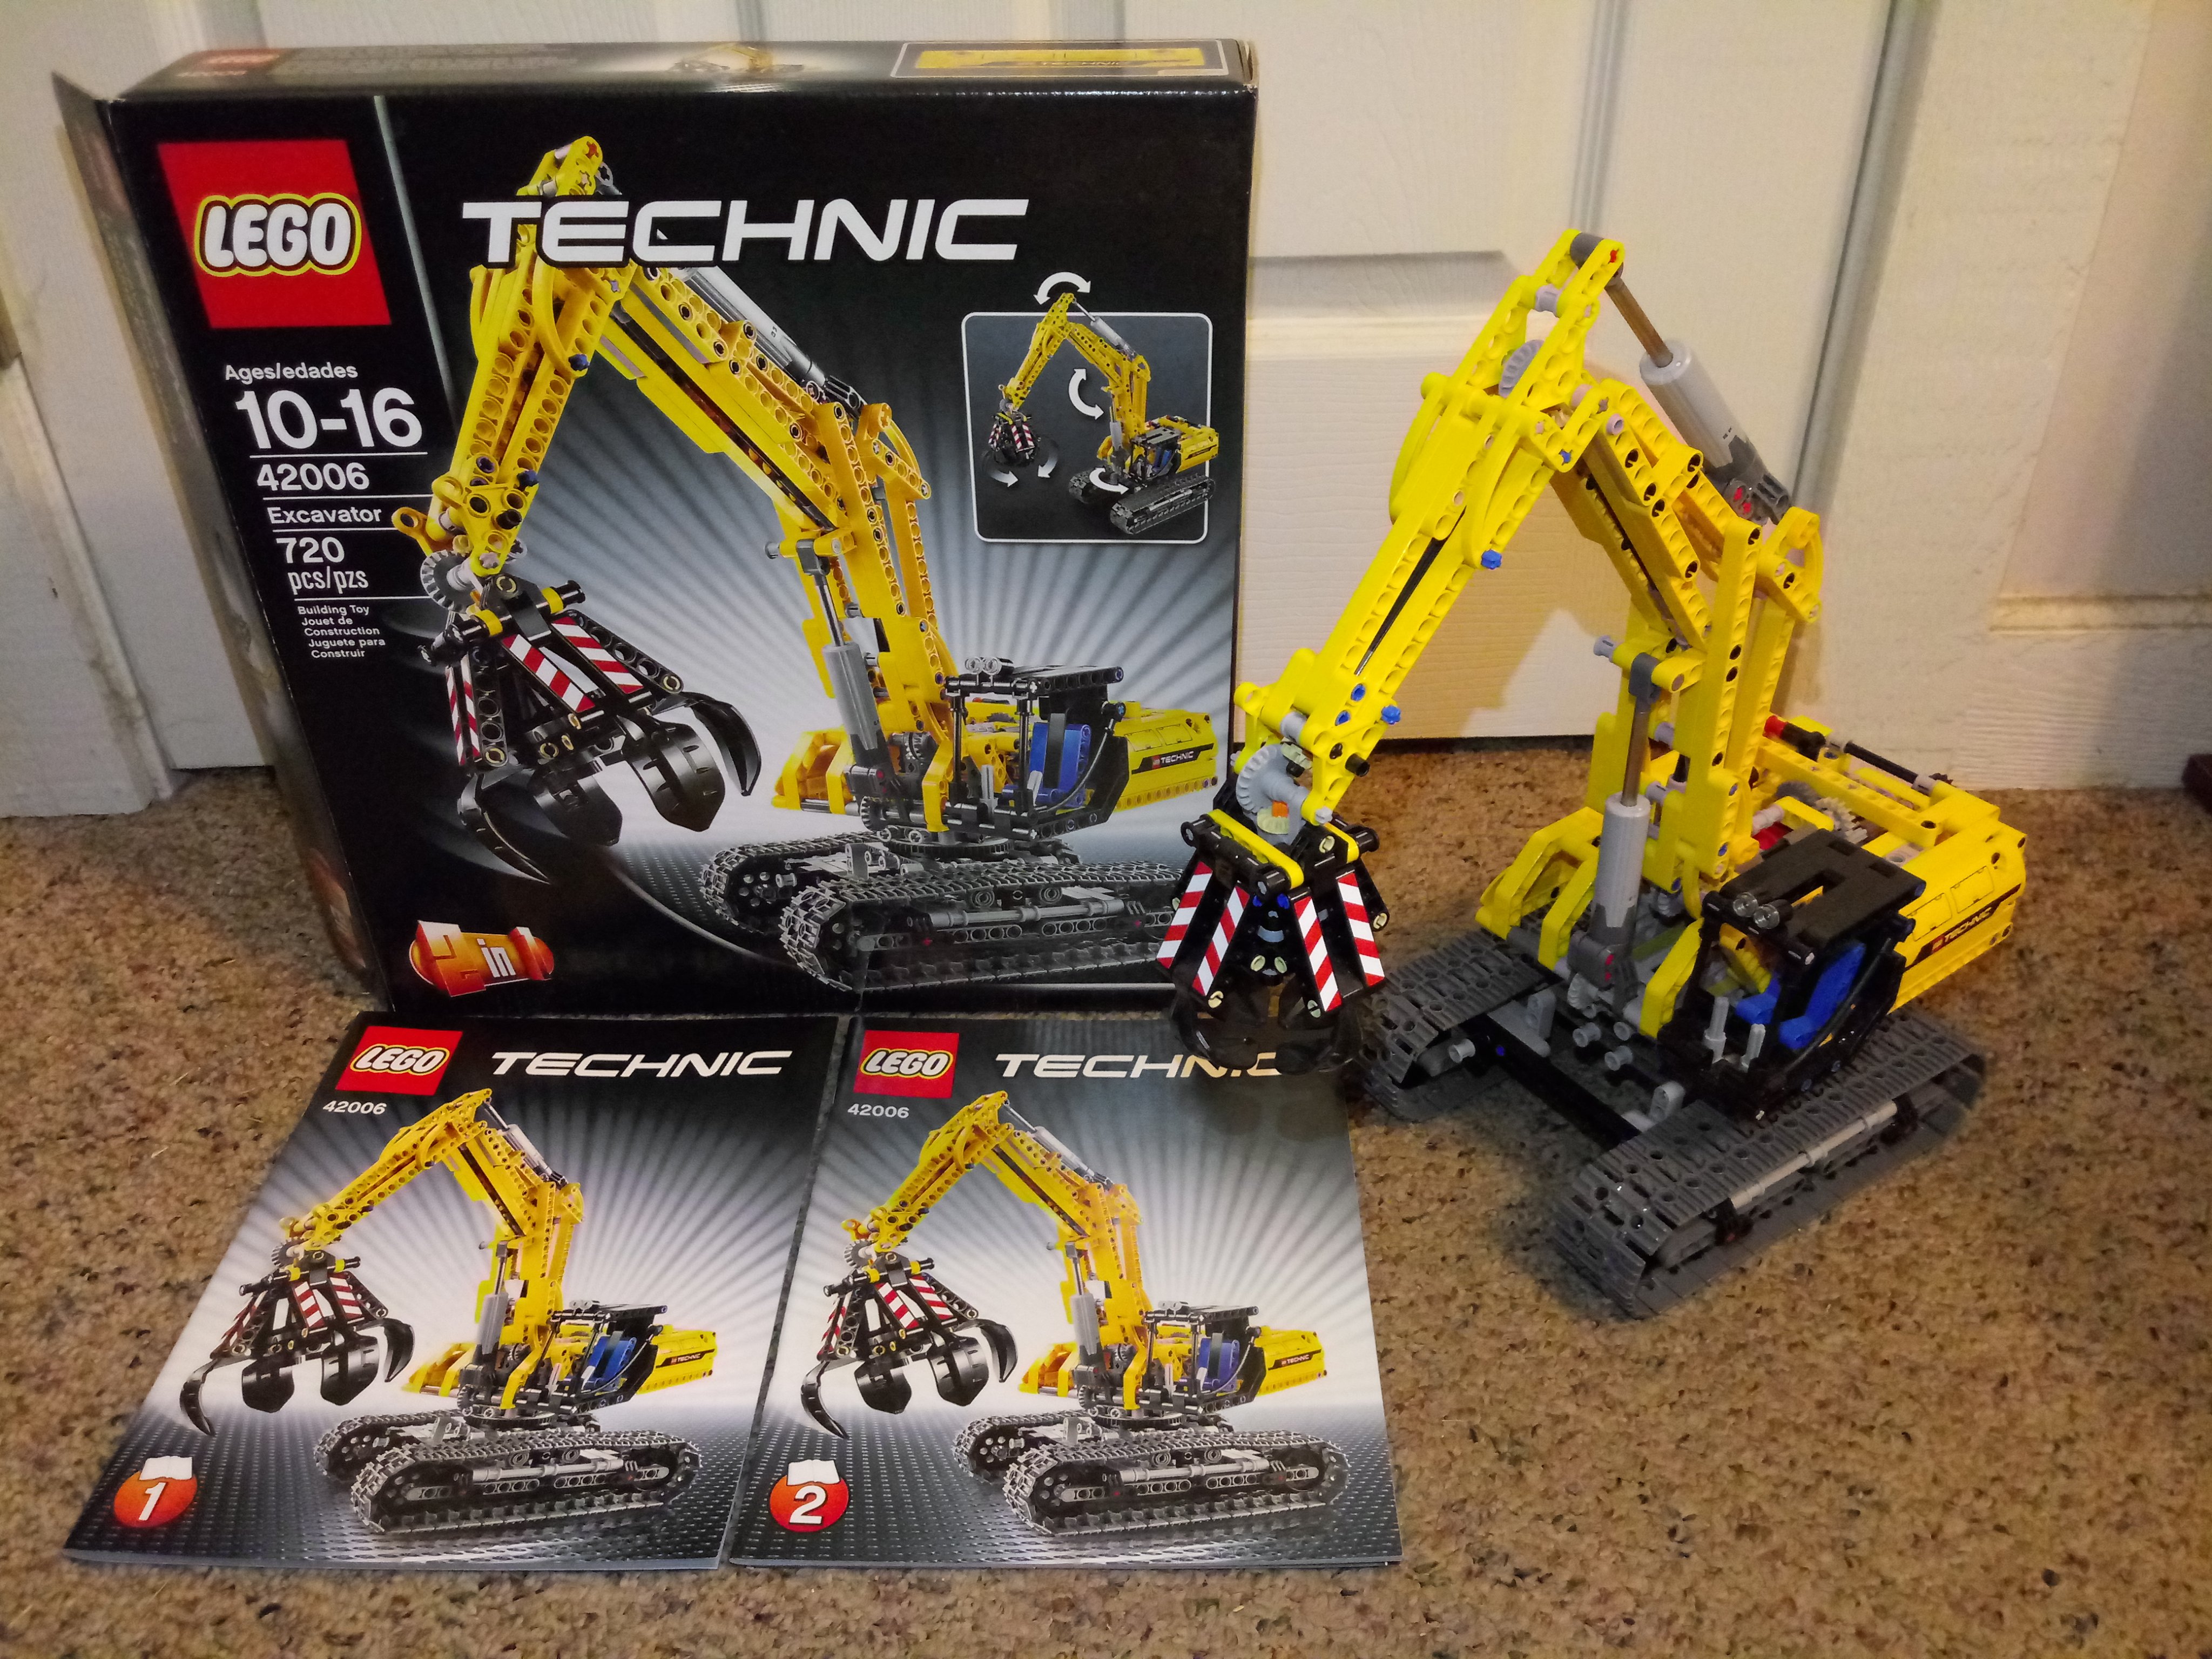 August Ray B. on "Part of my Lego 2013 Lego Technic 42006 Excavator first Technic set! This Excavator is super cool, but you would never want to be in